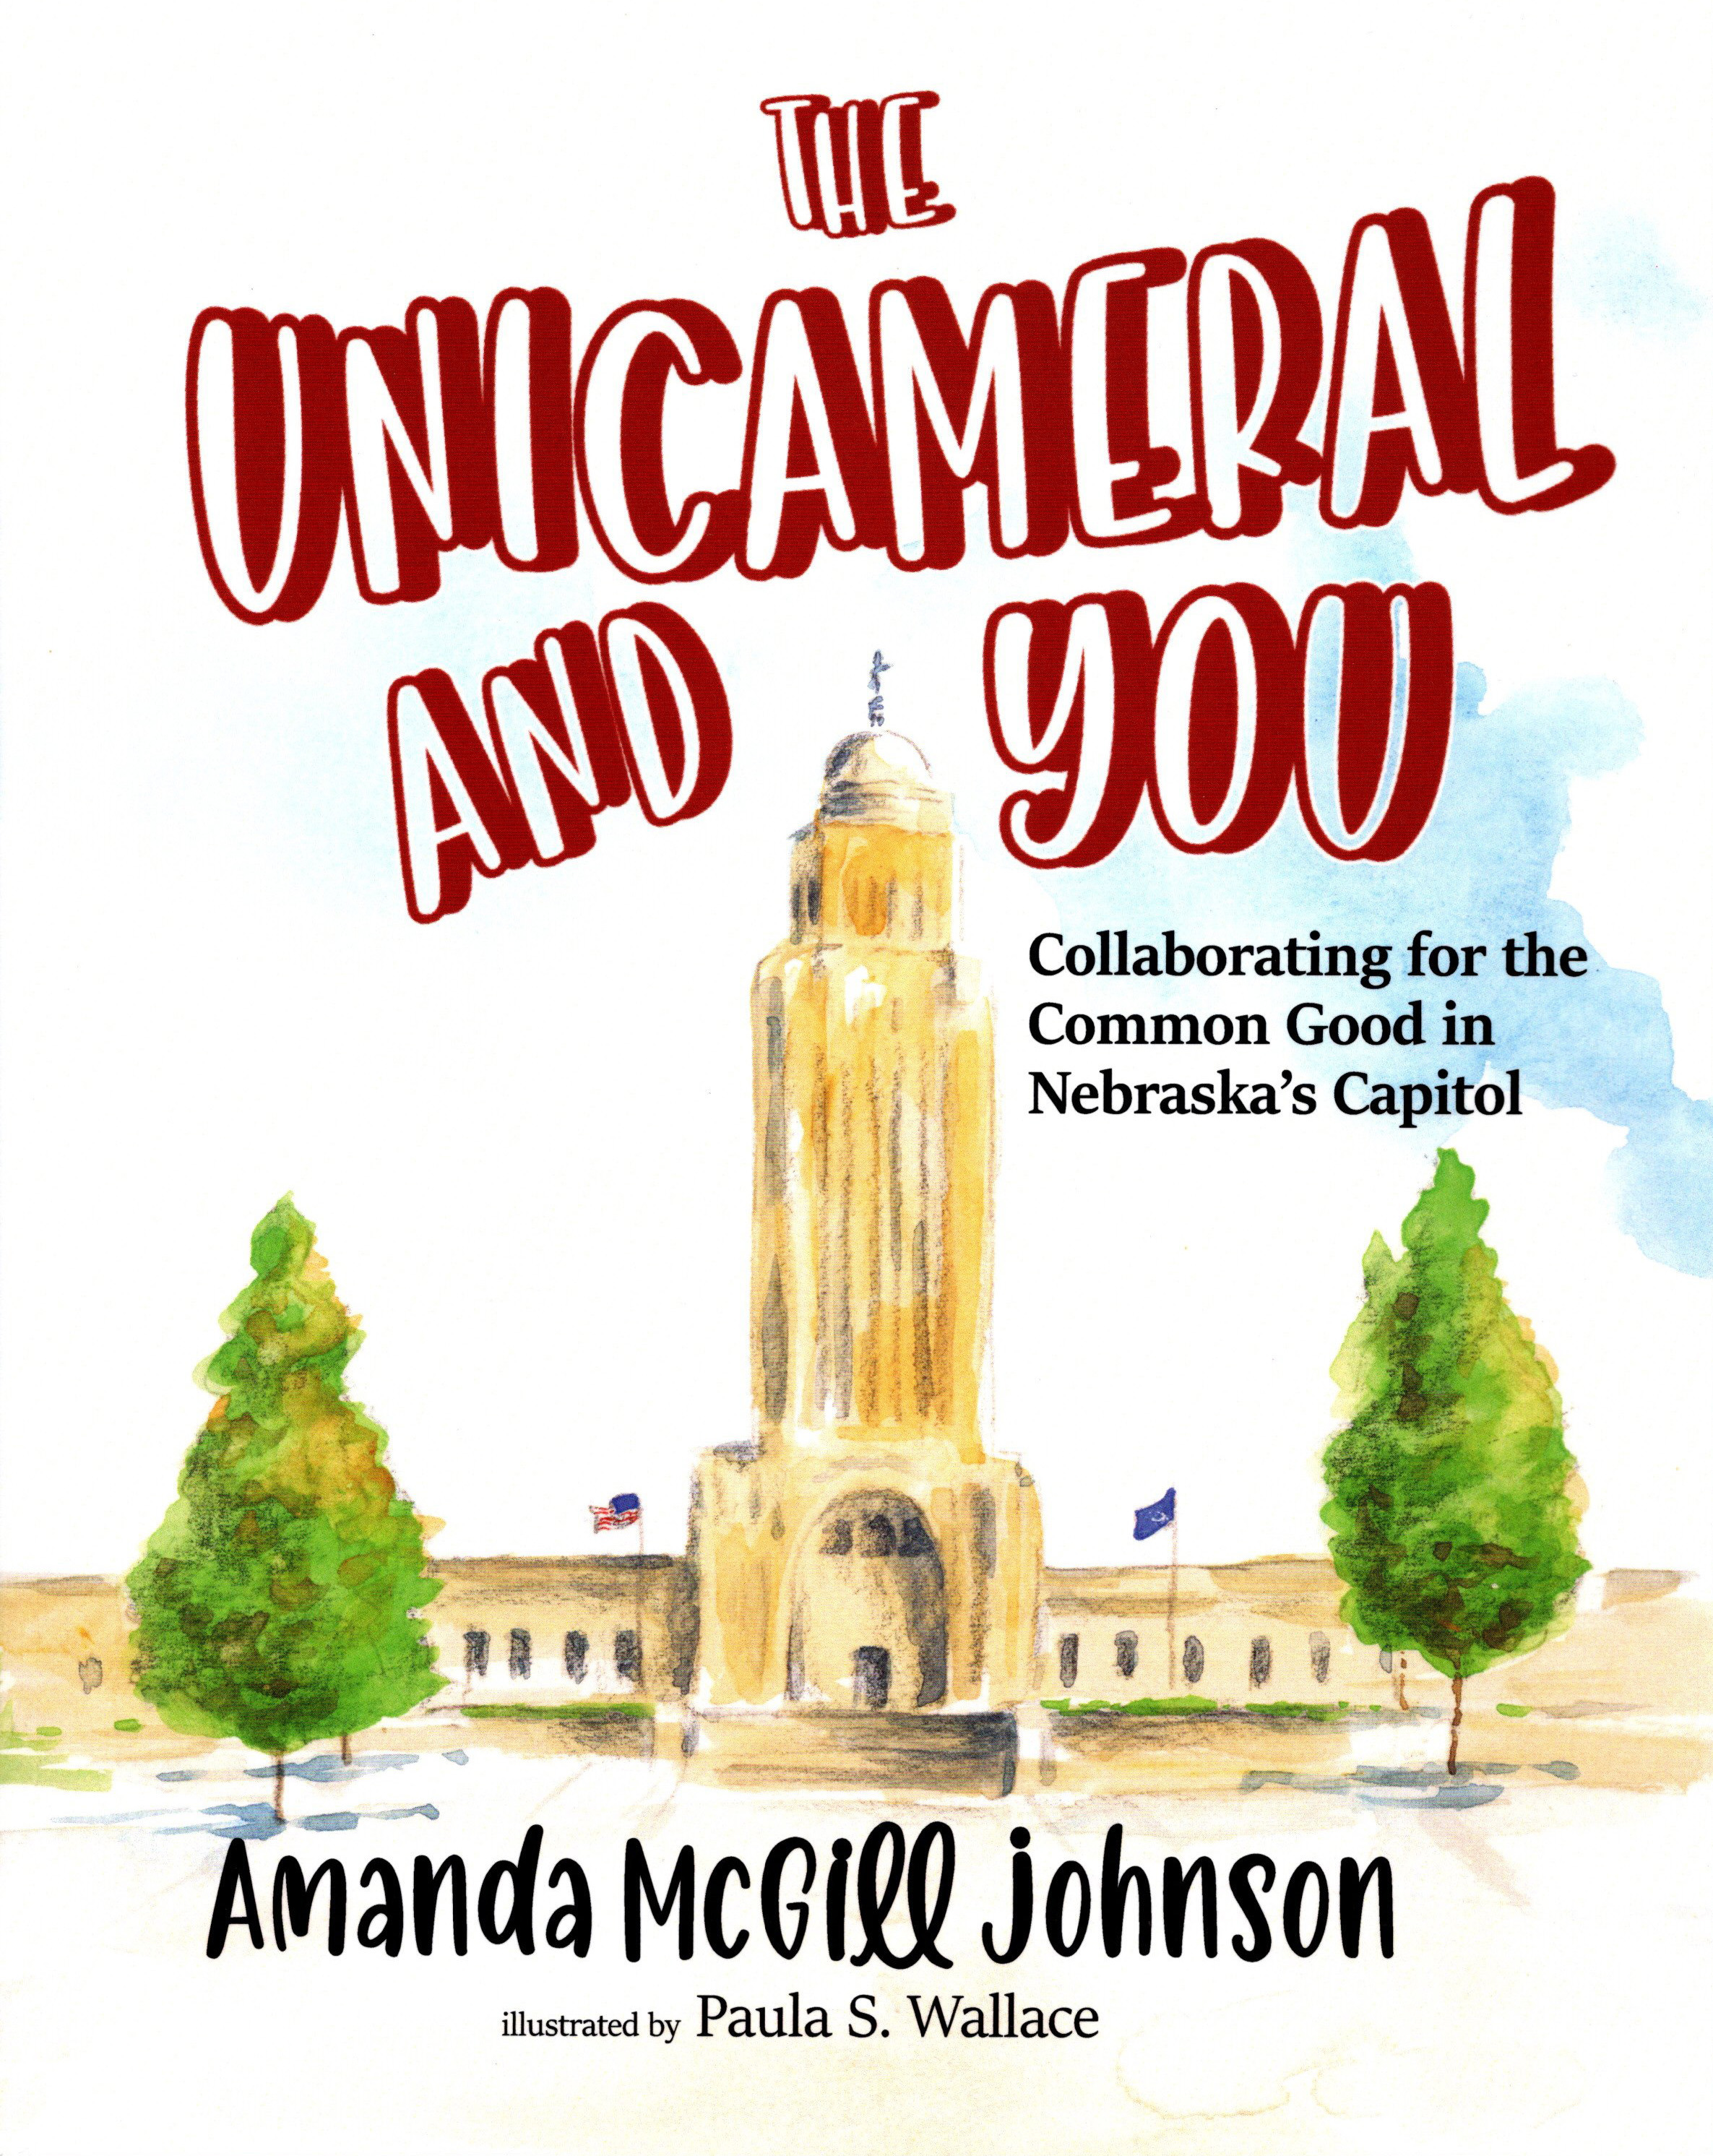 Unicameral and you mcgilljohnson cover fqytor